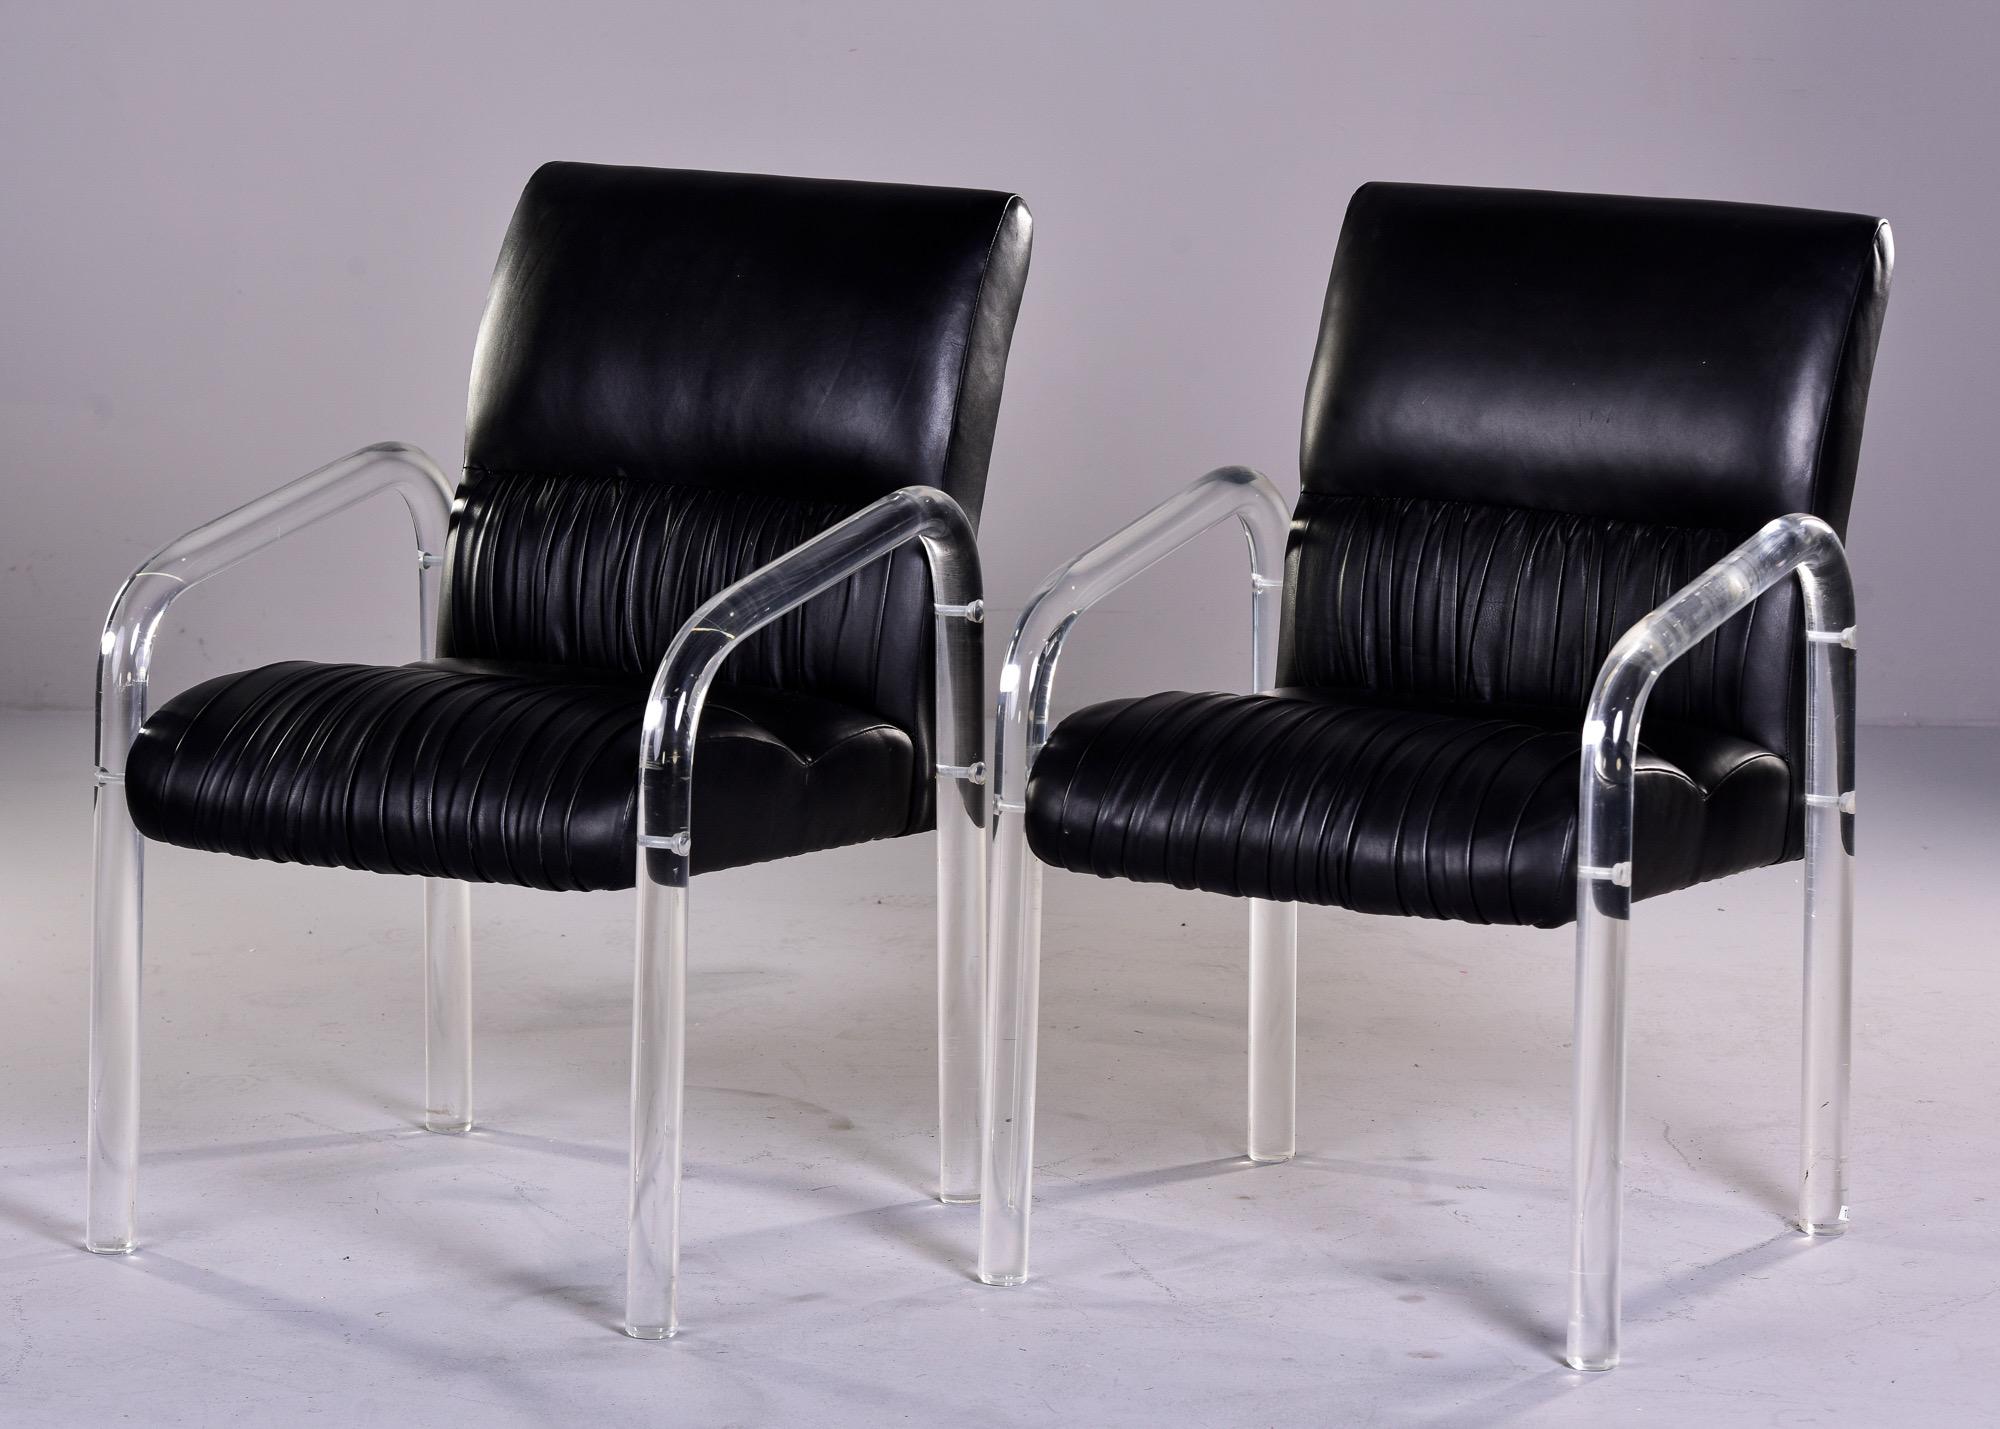 Circa 1980 pair of lucite and black leather armchairs by Lion in Frost. Original leather in very good vintage condition with gathered details at the back and seats. Maker’s etched signature on leg. Sold and priced as a pair. 

Measures: arm